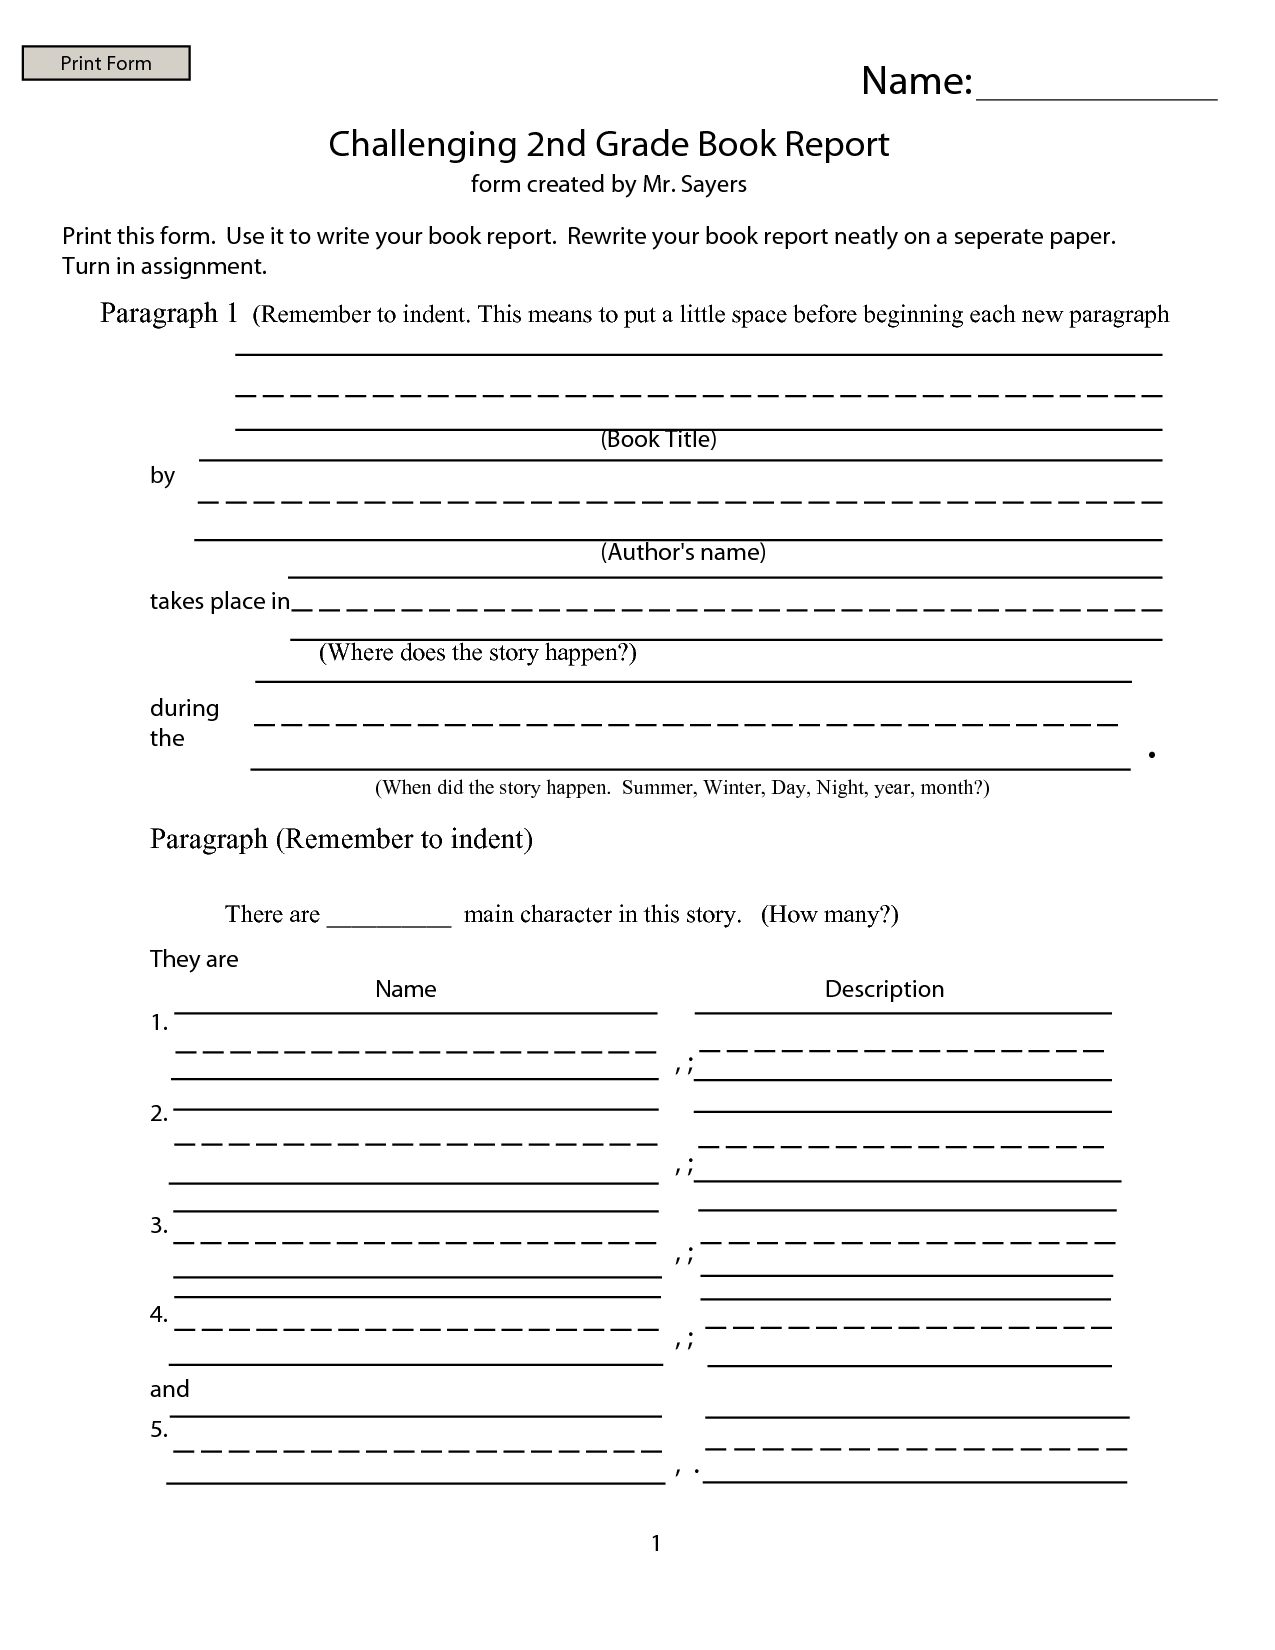 Worksheet Book Report | Printable Worksheets And Activities Throughout Second Grade Book Report Template